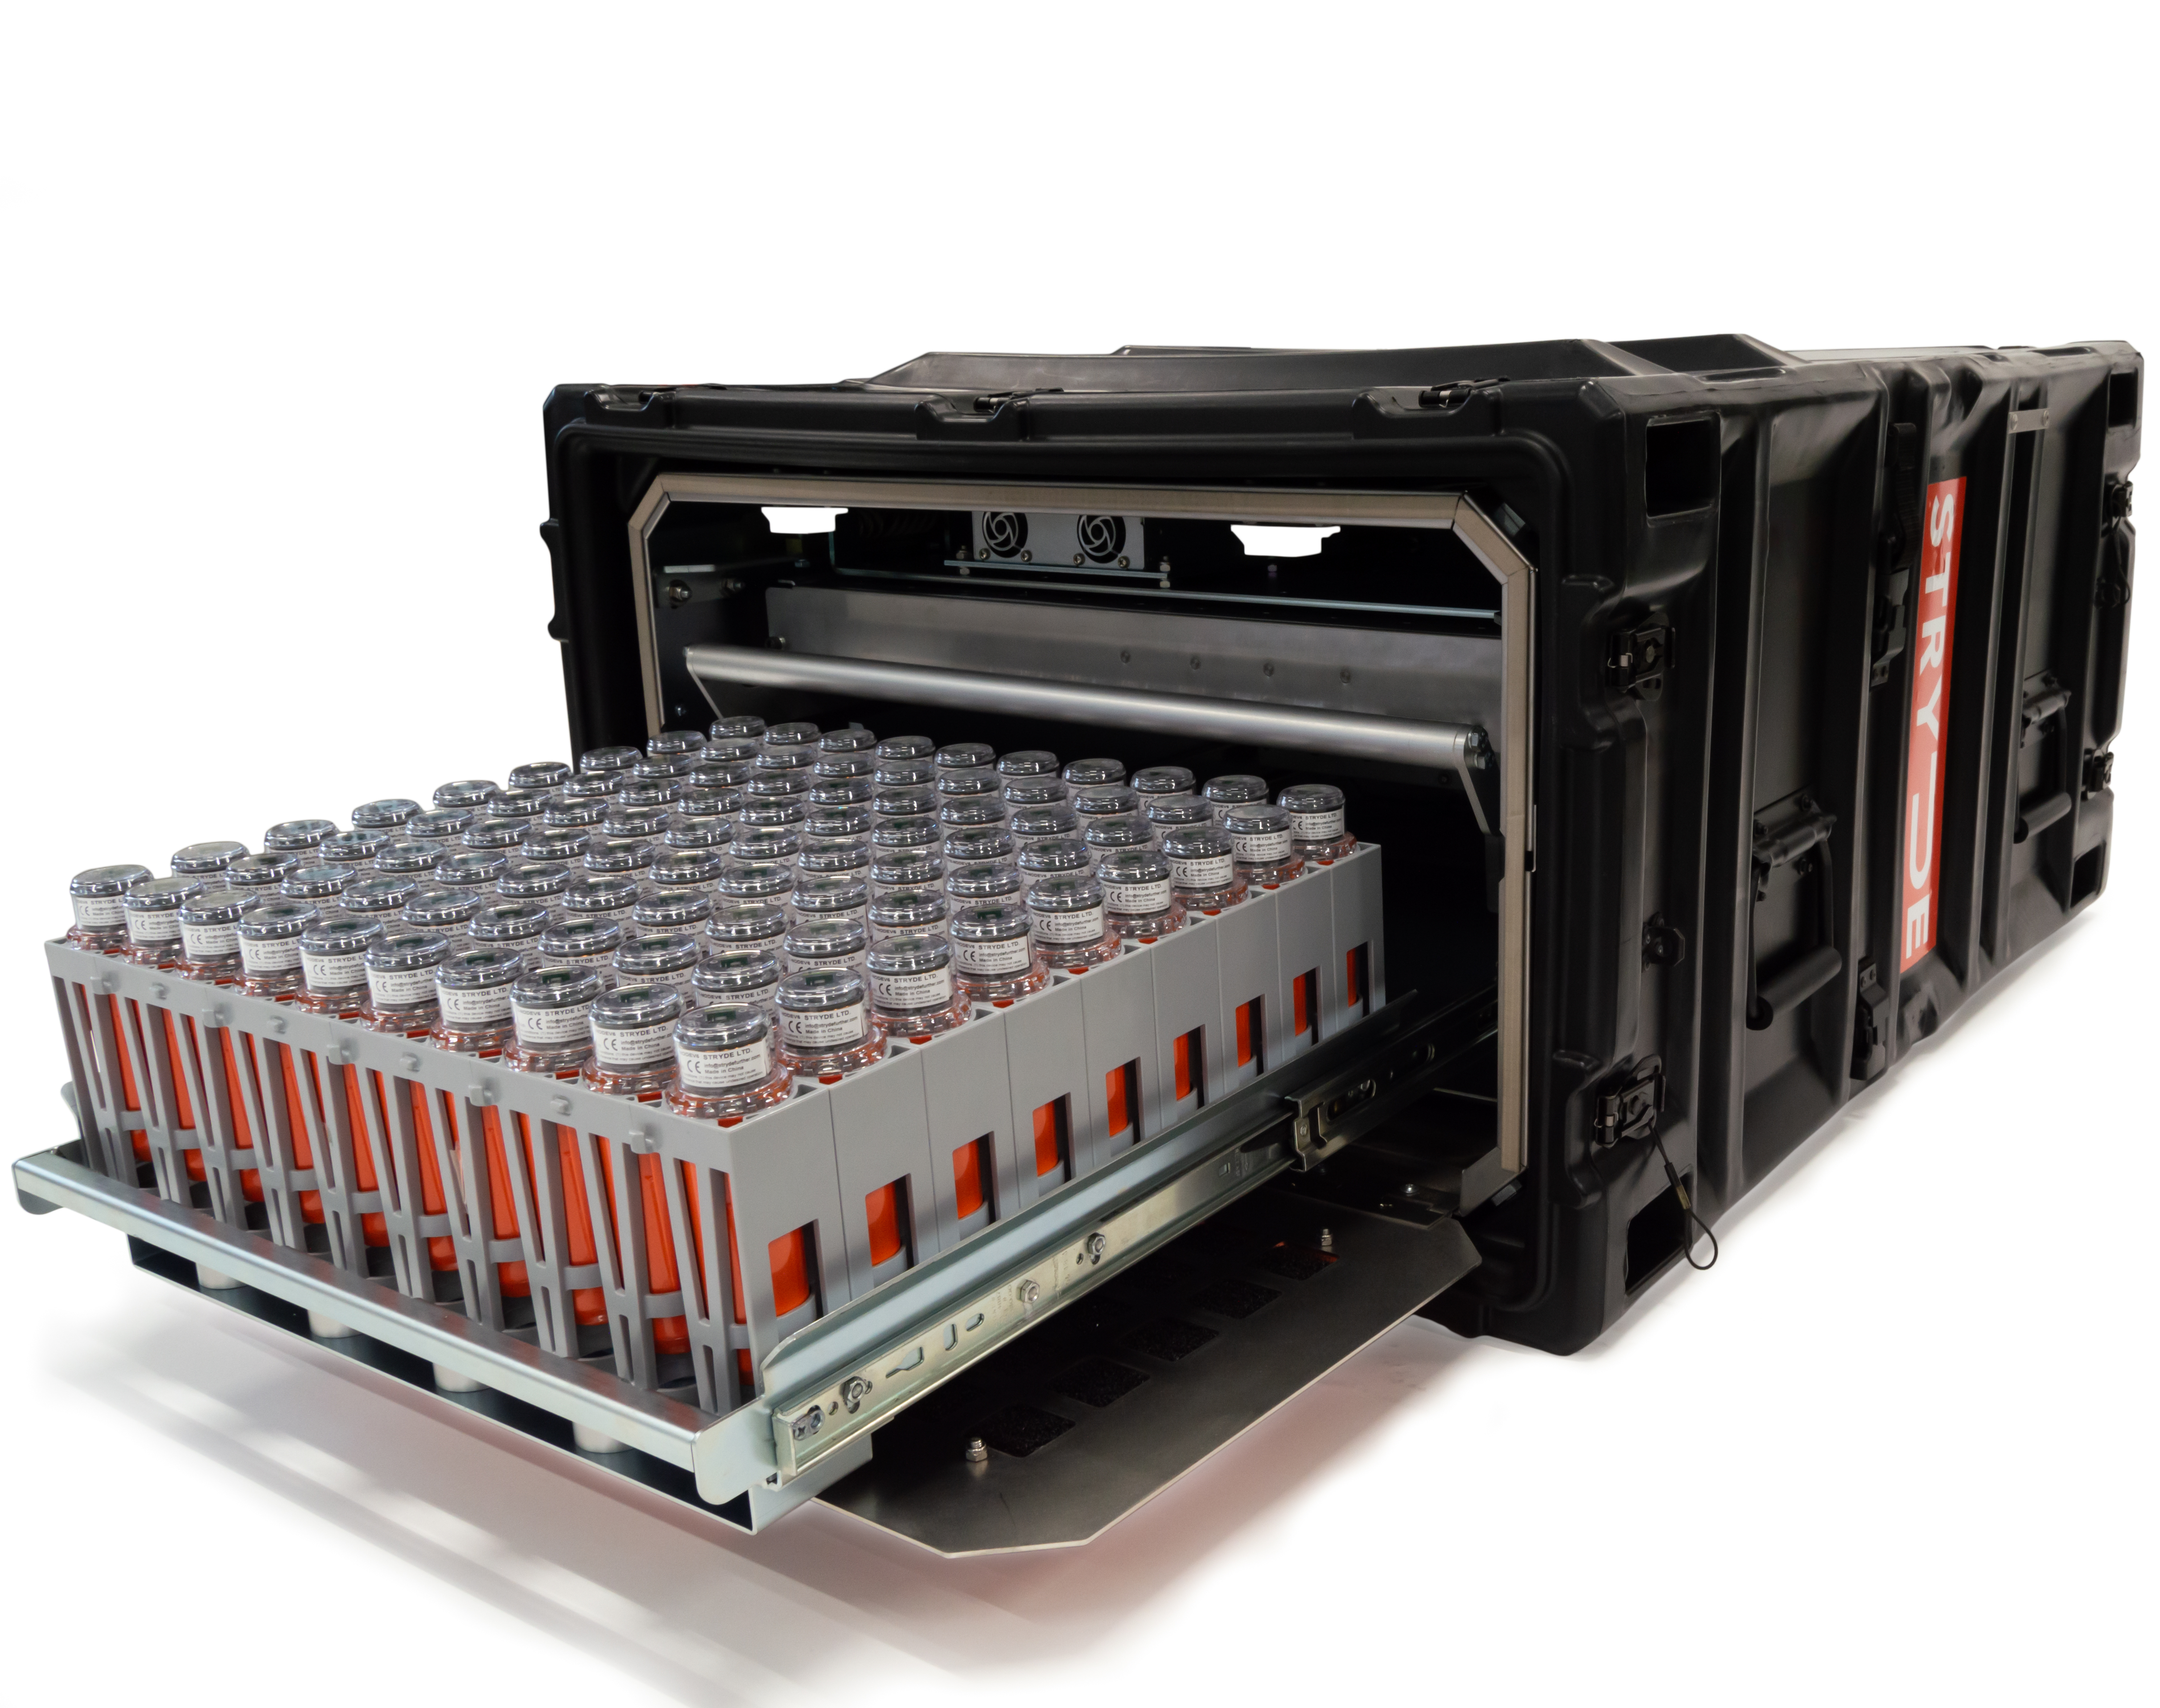 Success Story: How Peli rack cases are adapted to house seismic nodal systems